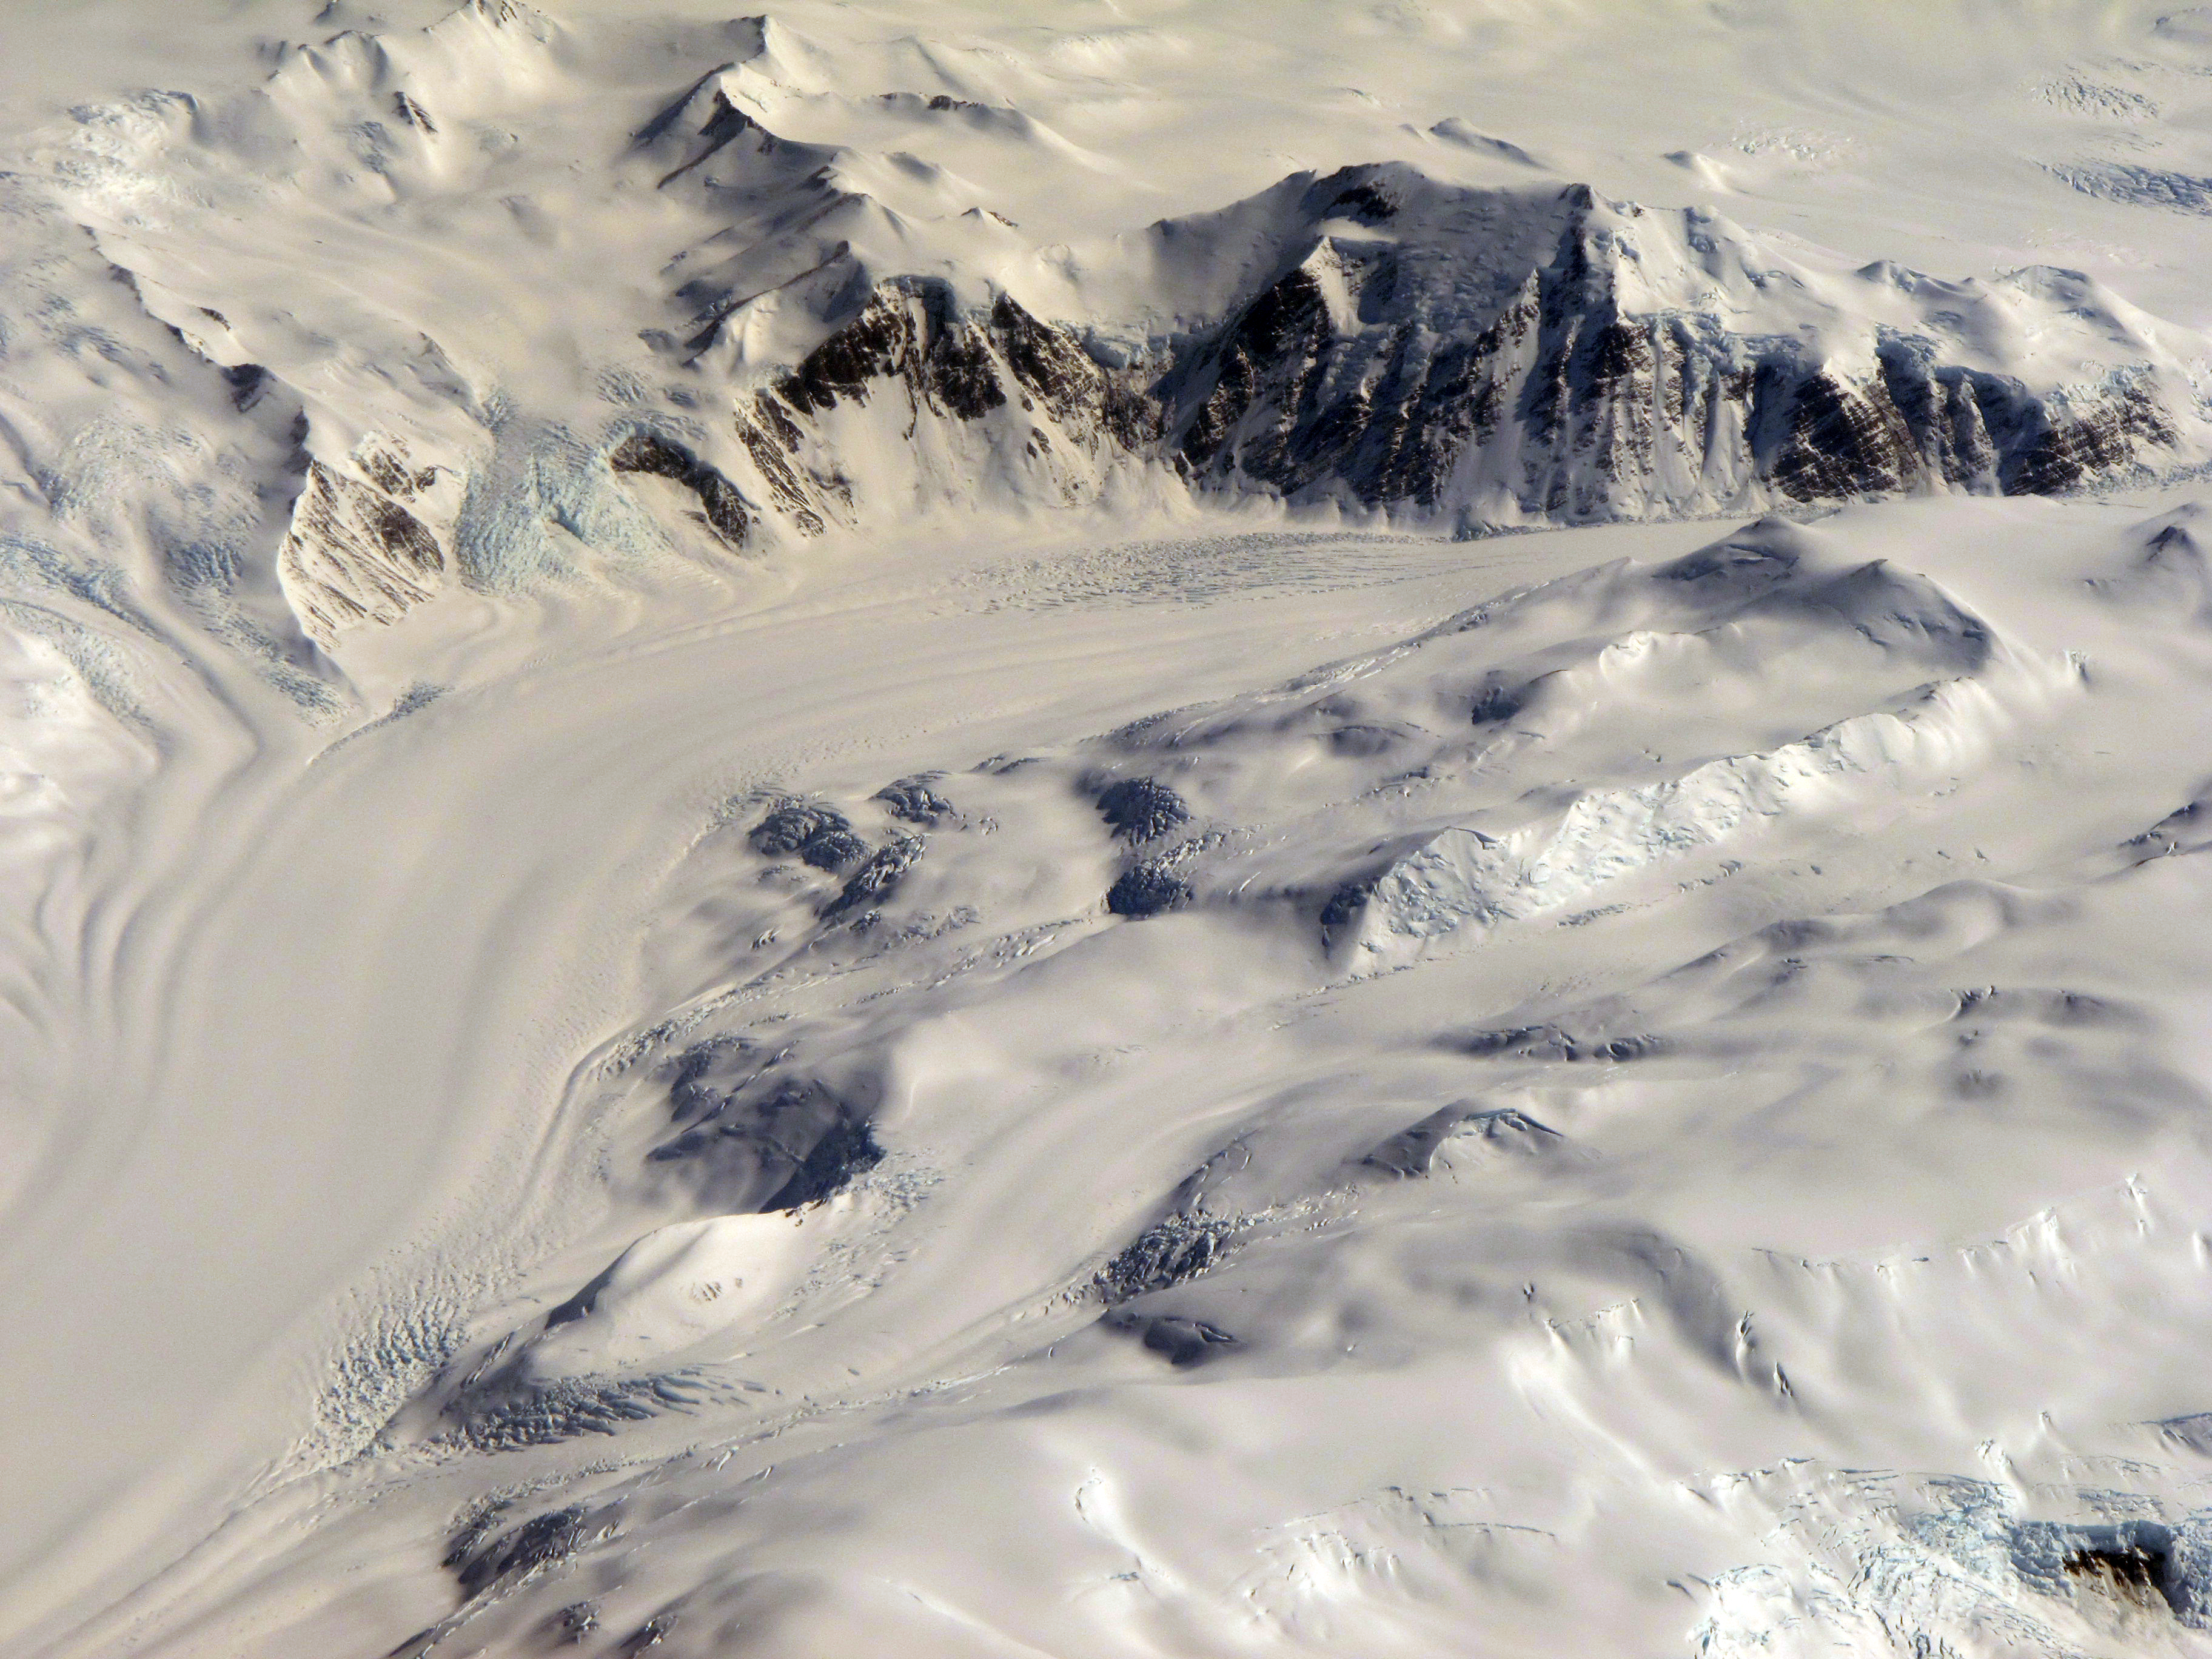 Aerial view of mountains and glaciers.